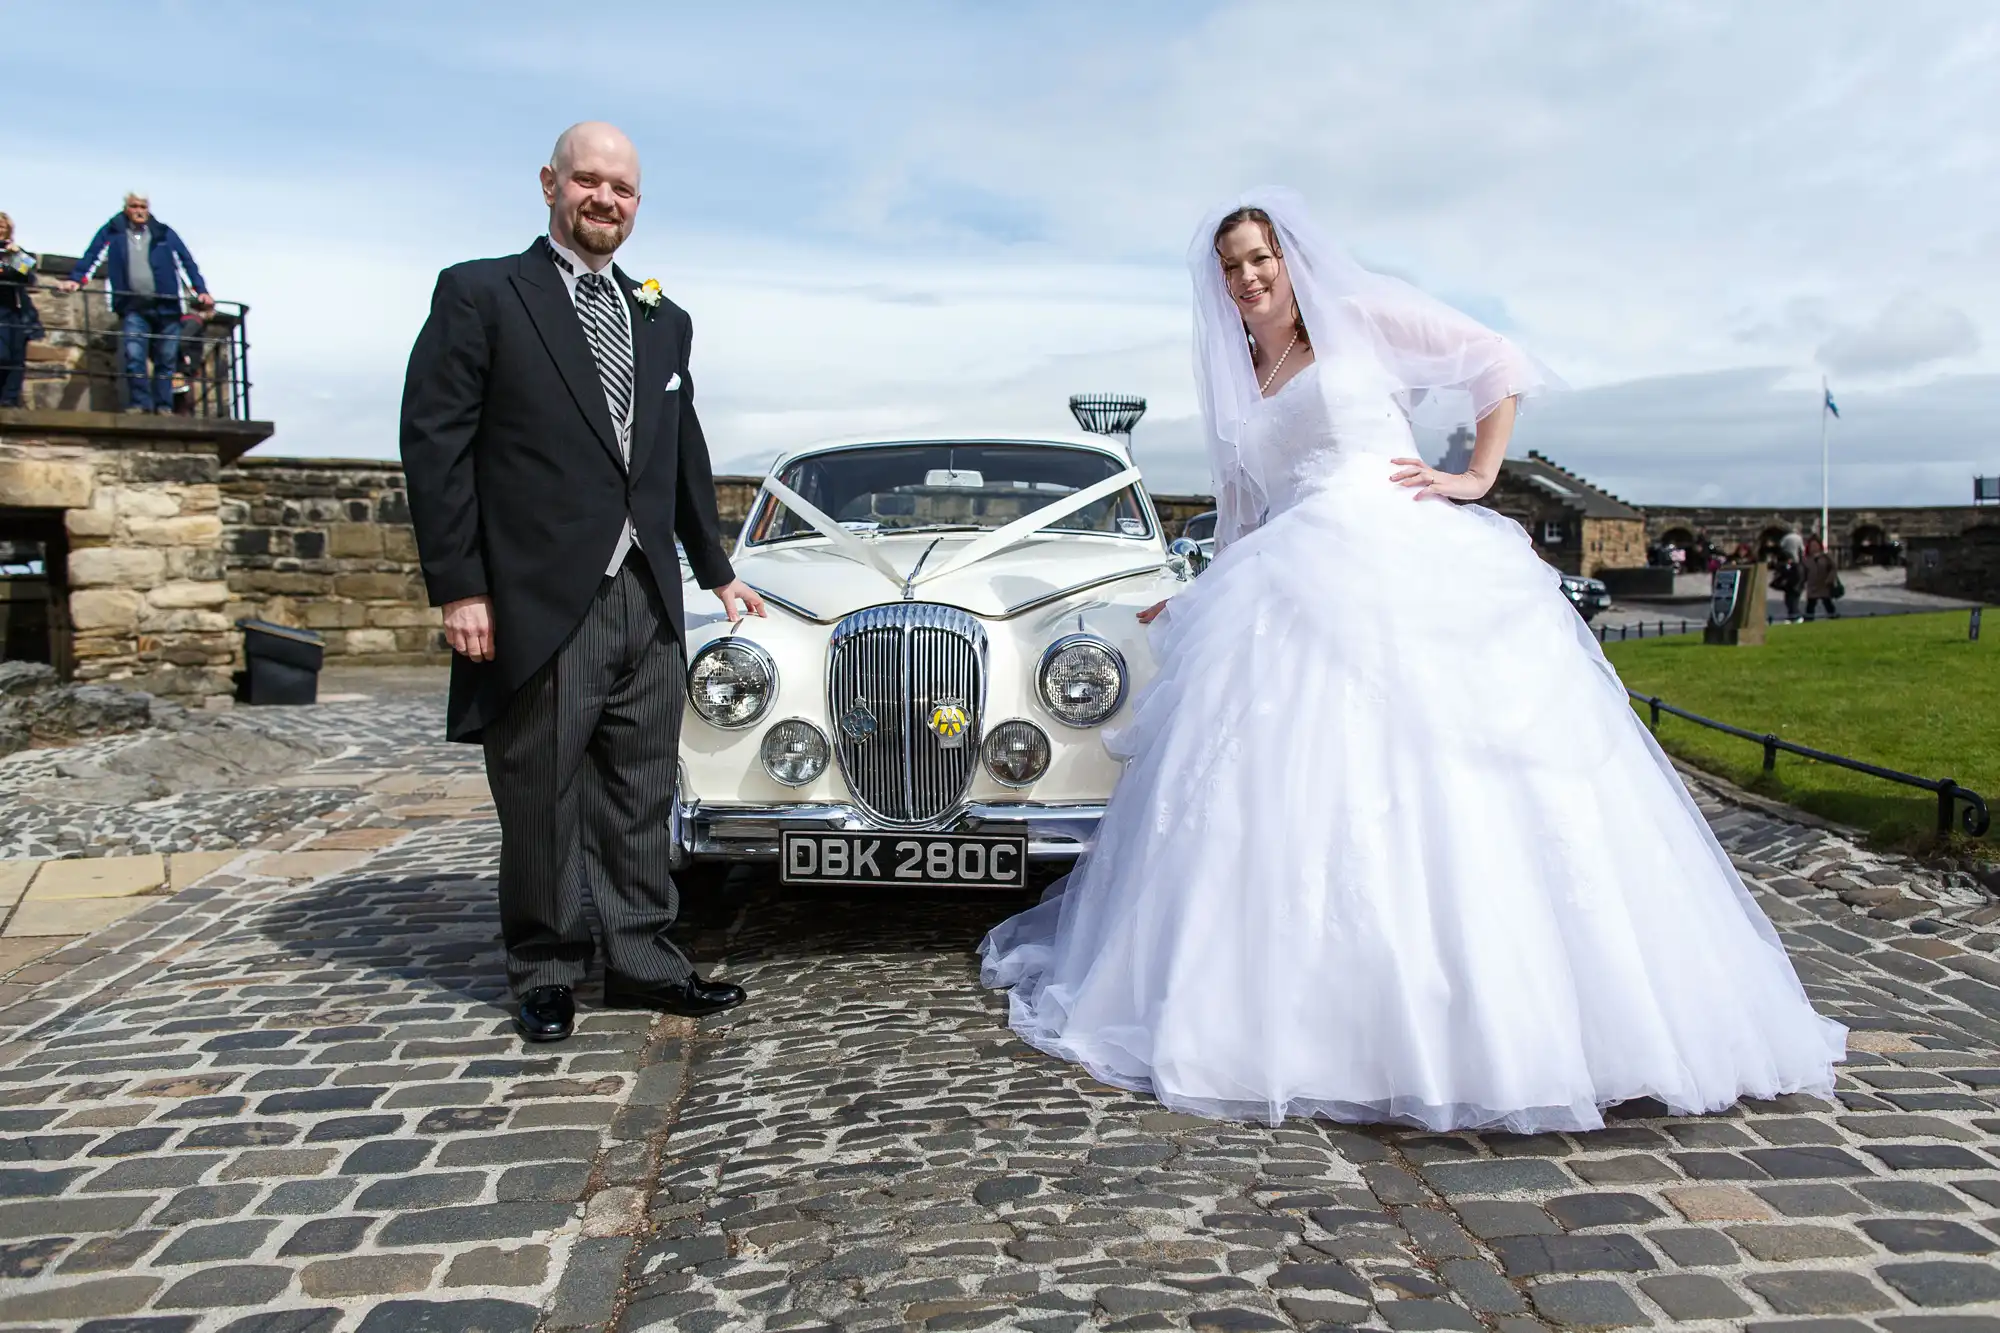 Bride and groom smiling beside a classic car on a stone pavement, with a historic castle and clear skies in the background.